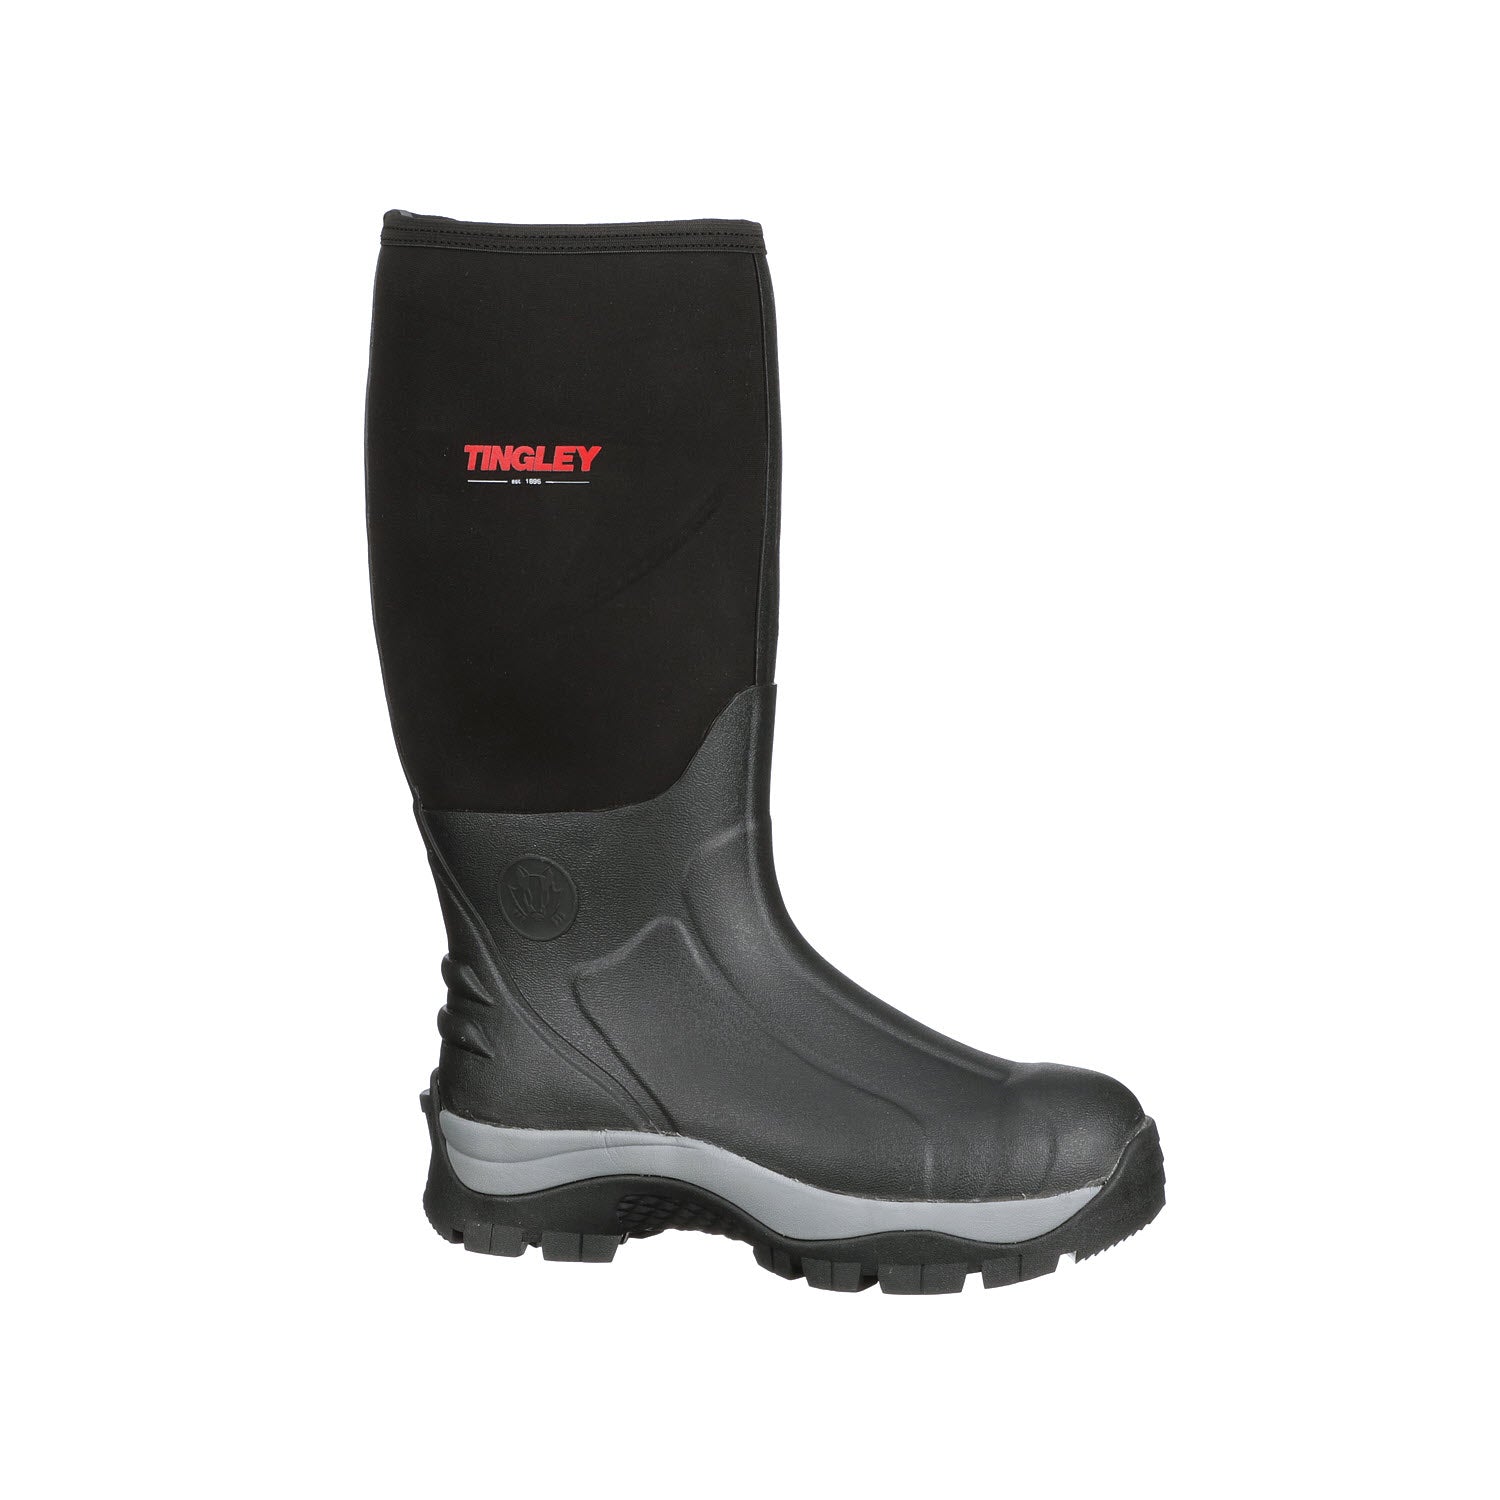 Badger Boots Insulated– Tingley